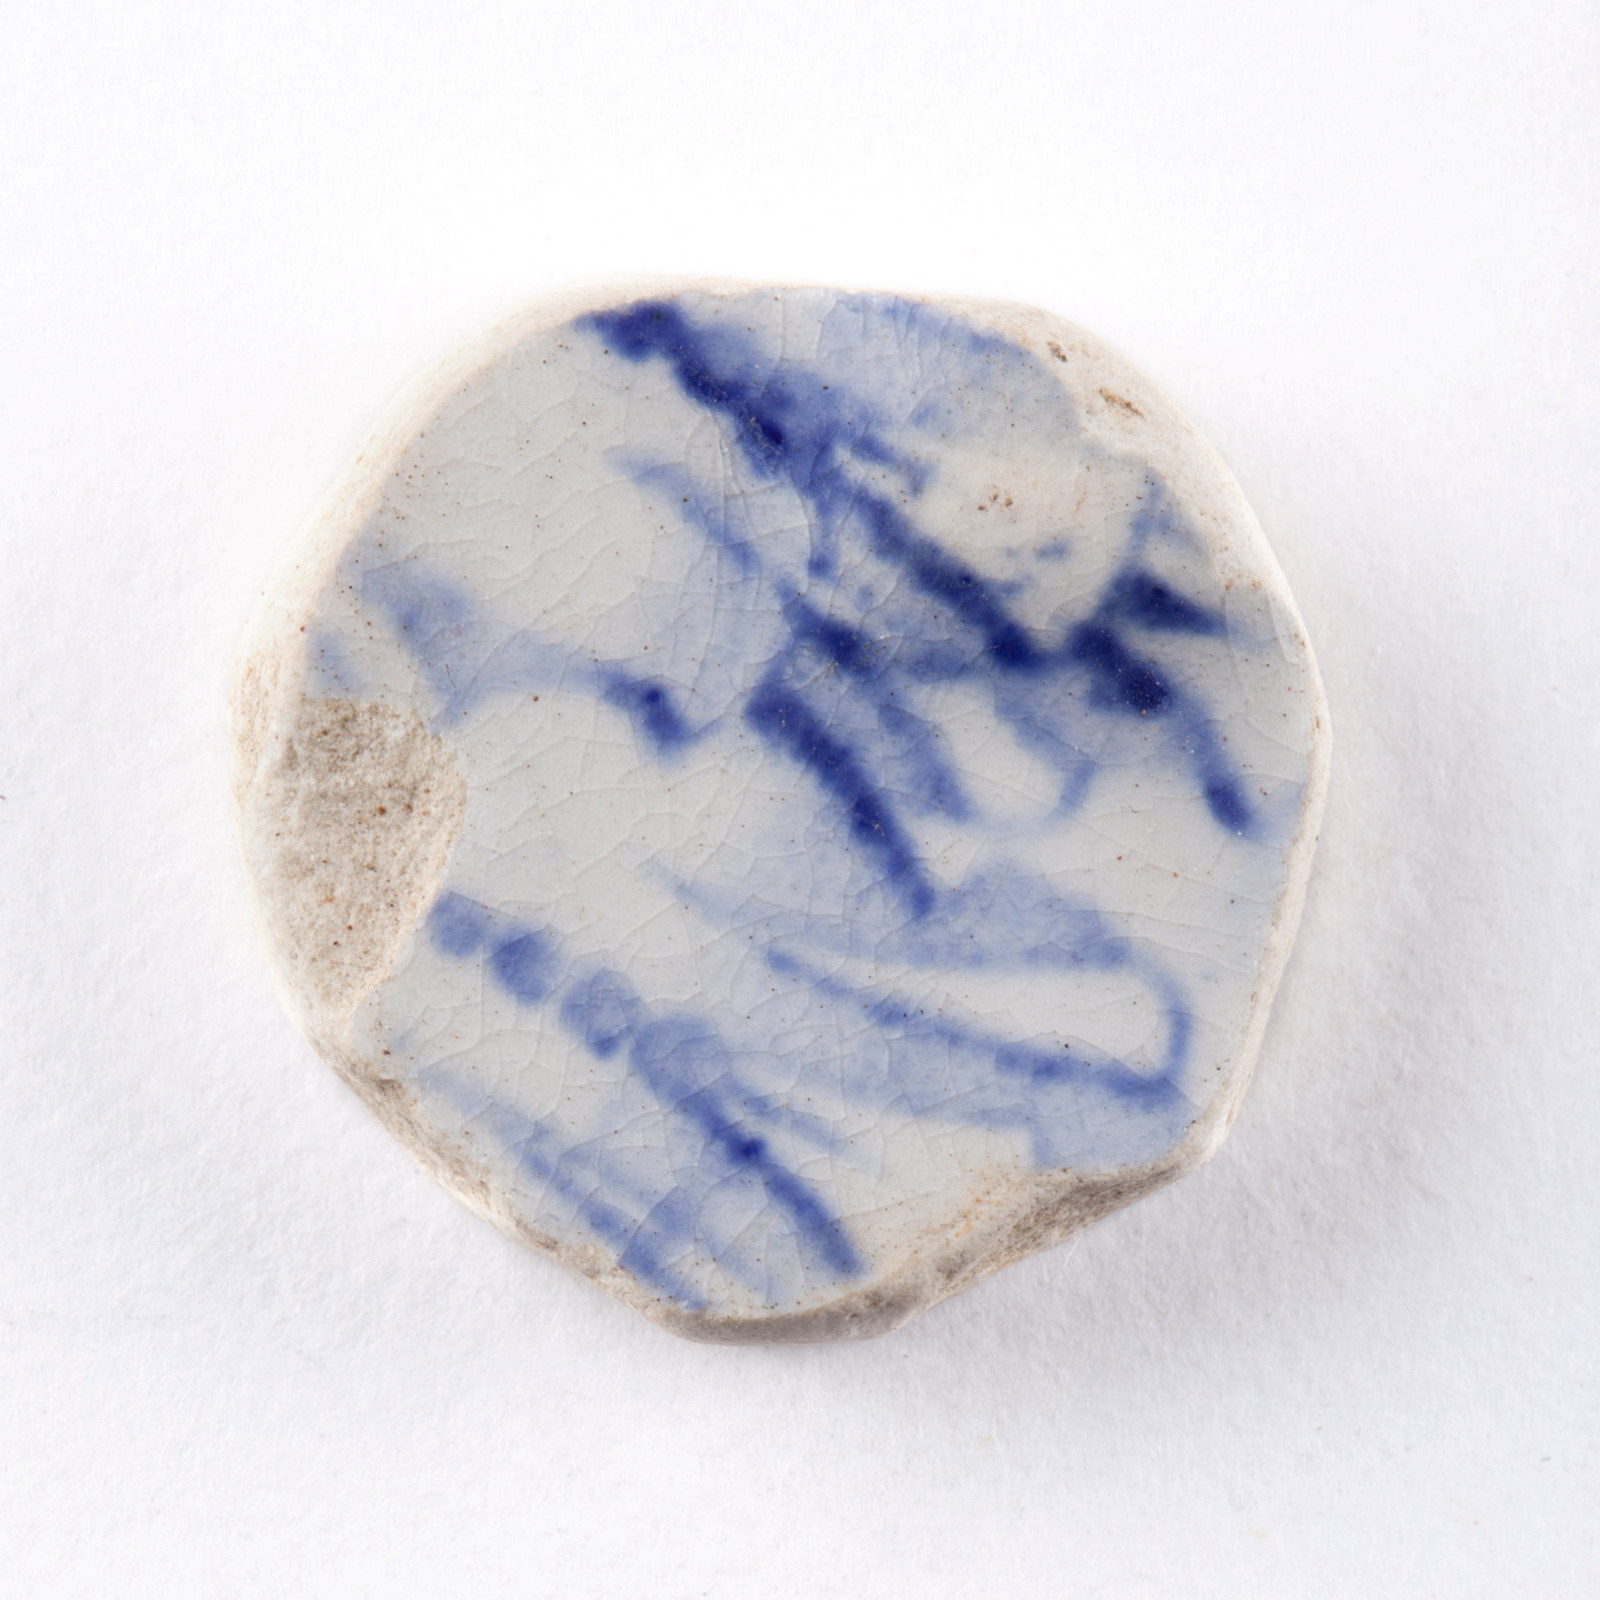 Ceramic game piece found underfloor at Hyde Park Barracks during archaeological excavations